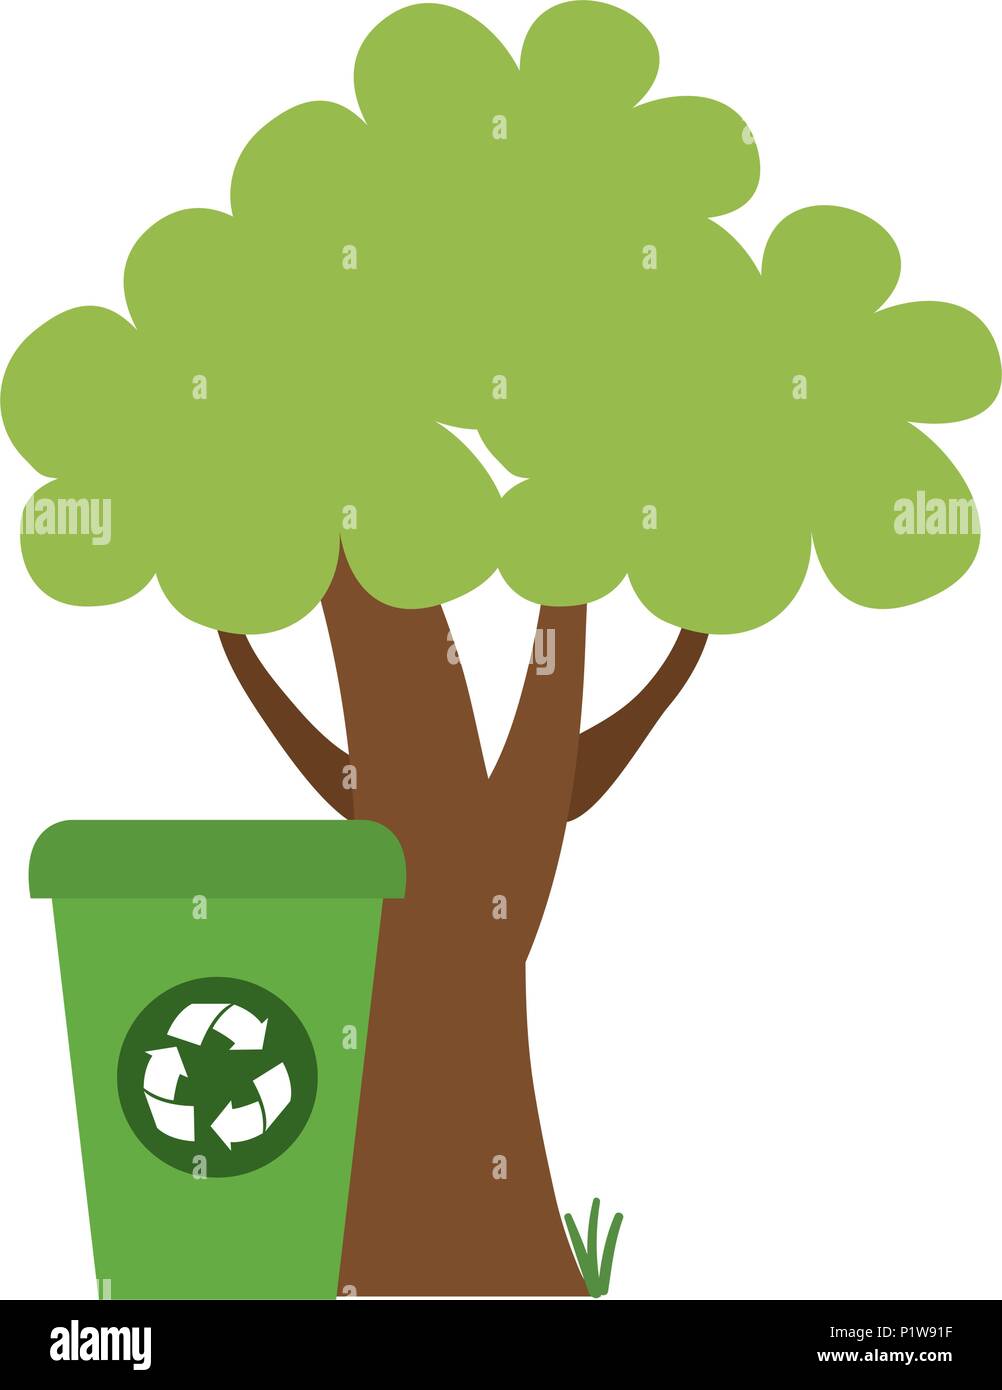 ecology tree plant with recycle bin Stock Vector